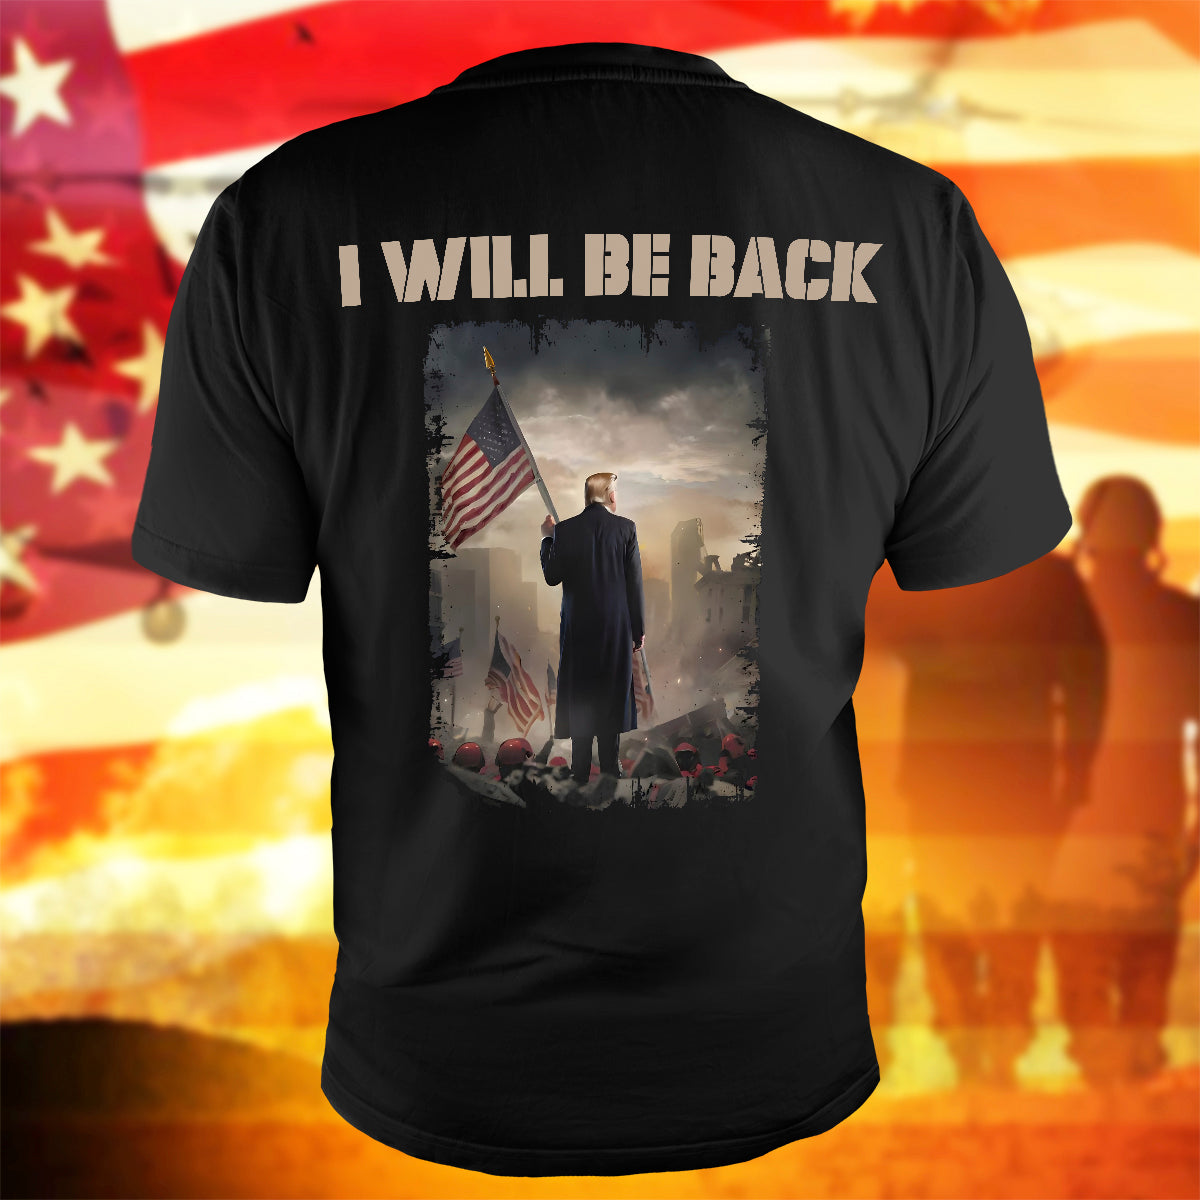 Funny Political T-Shirt I Will Be Back Shirt American Citizen Gift